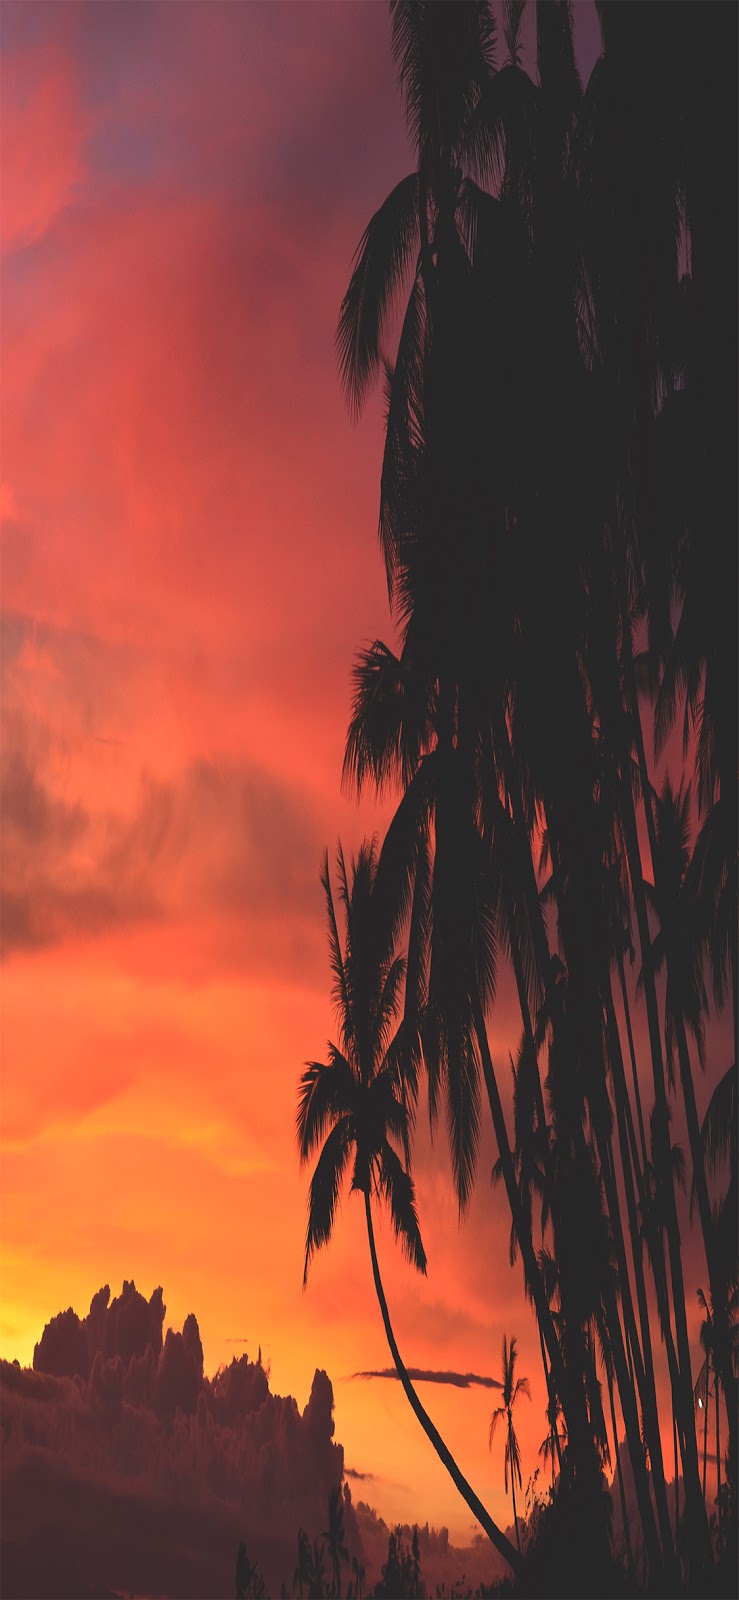 Backgrounds Wallpapers Sunsets